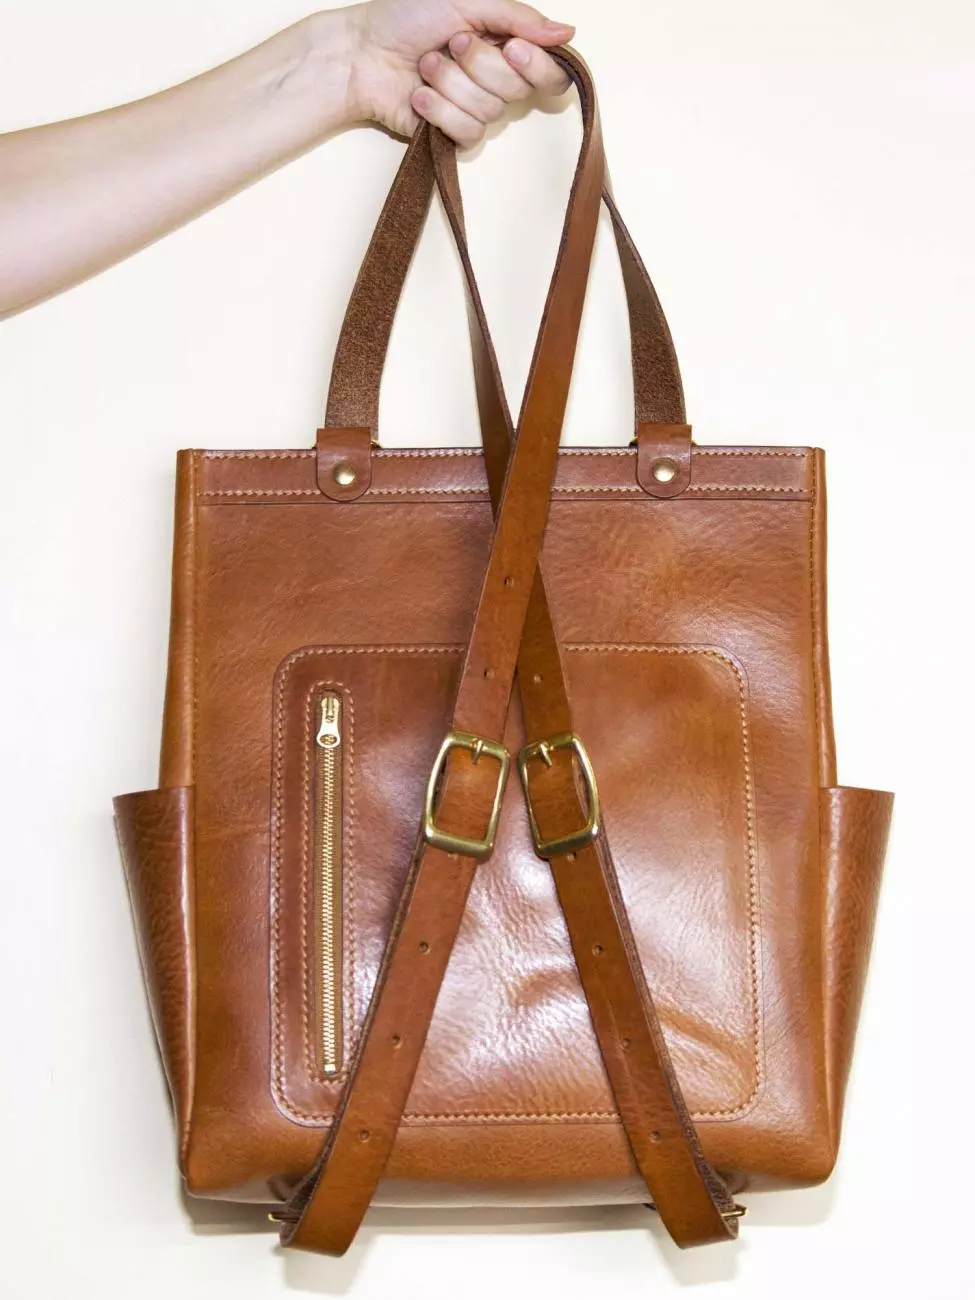 6 - Women leather backpack